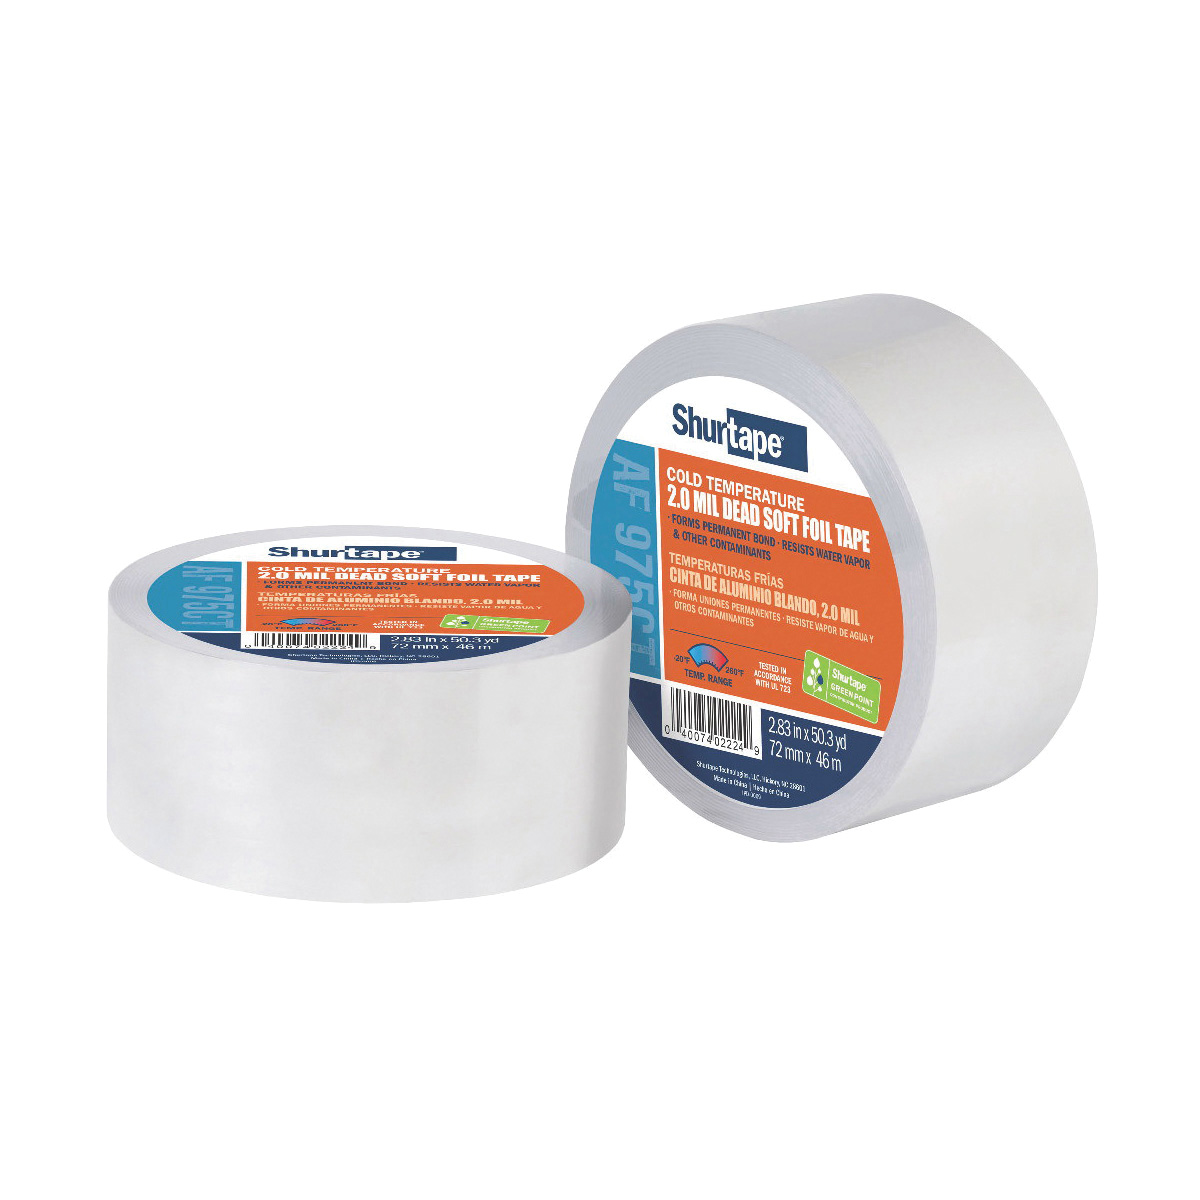 Shurtape® 232043 AF 975CT HVAC Contractor-Grade Foil Tape, 46 m L x 60 mm W, 7.3 mil with Liner/4 mil without Liner THK, Cold Temperature Acrylic Adhesive, Dead-Soft Aluminum Foil Backing, Silver